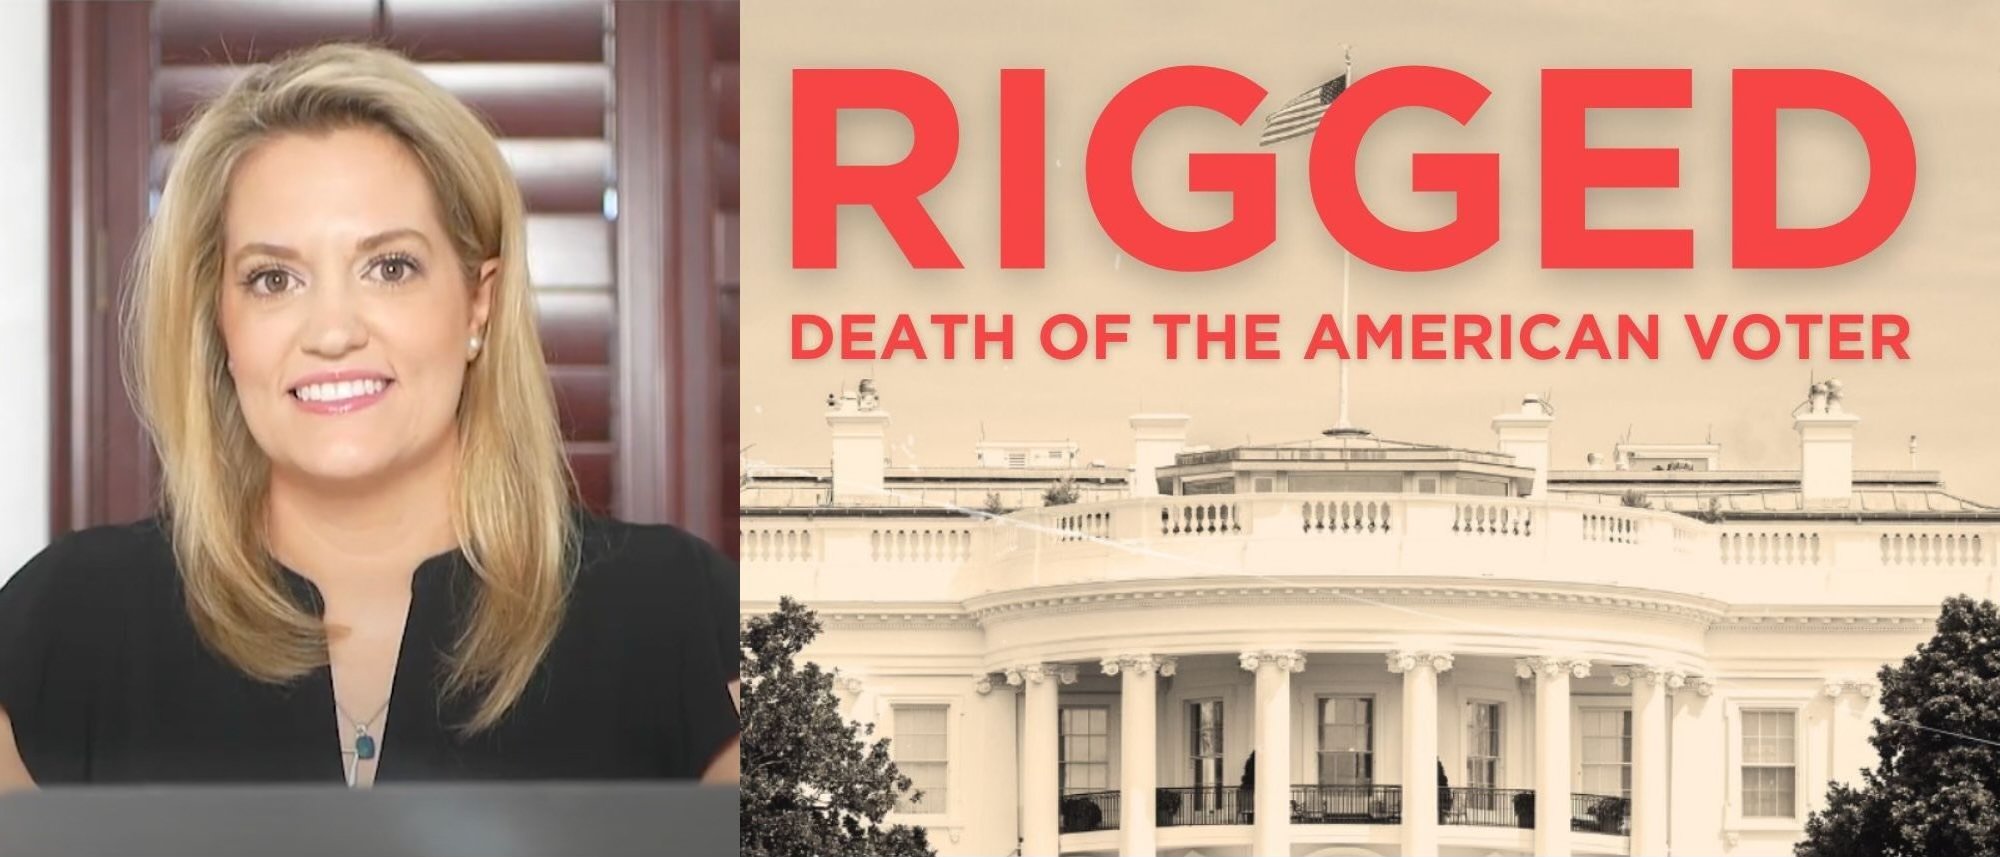 Mary Rooke Calls Out Mainstream Media For Ignoring Election Integrity, Says ‘Rigged’ Fills That Gap